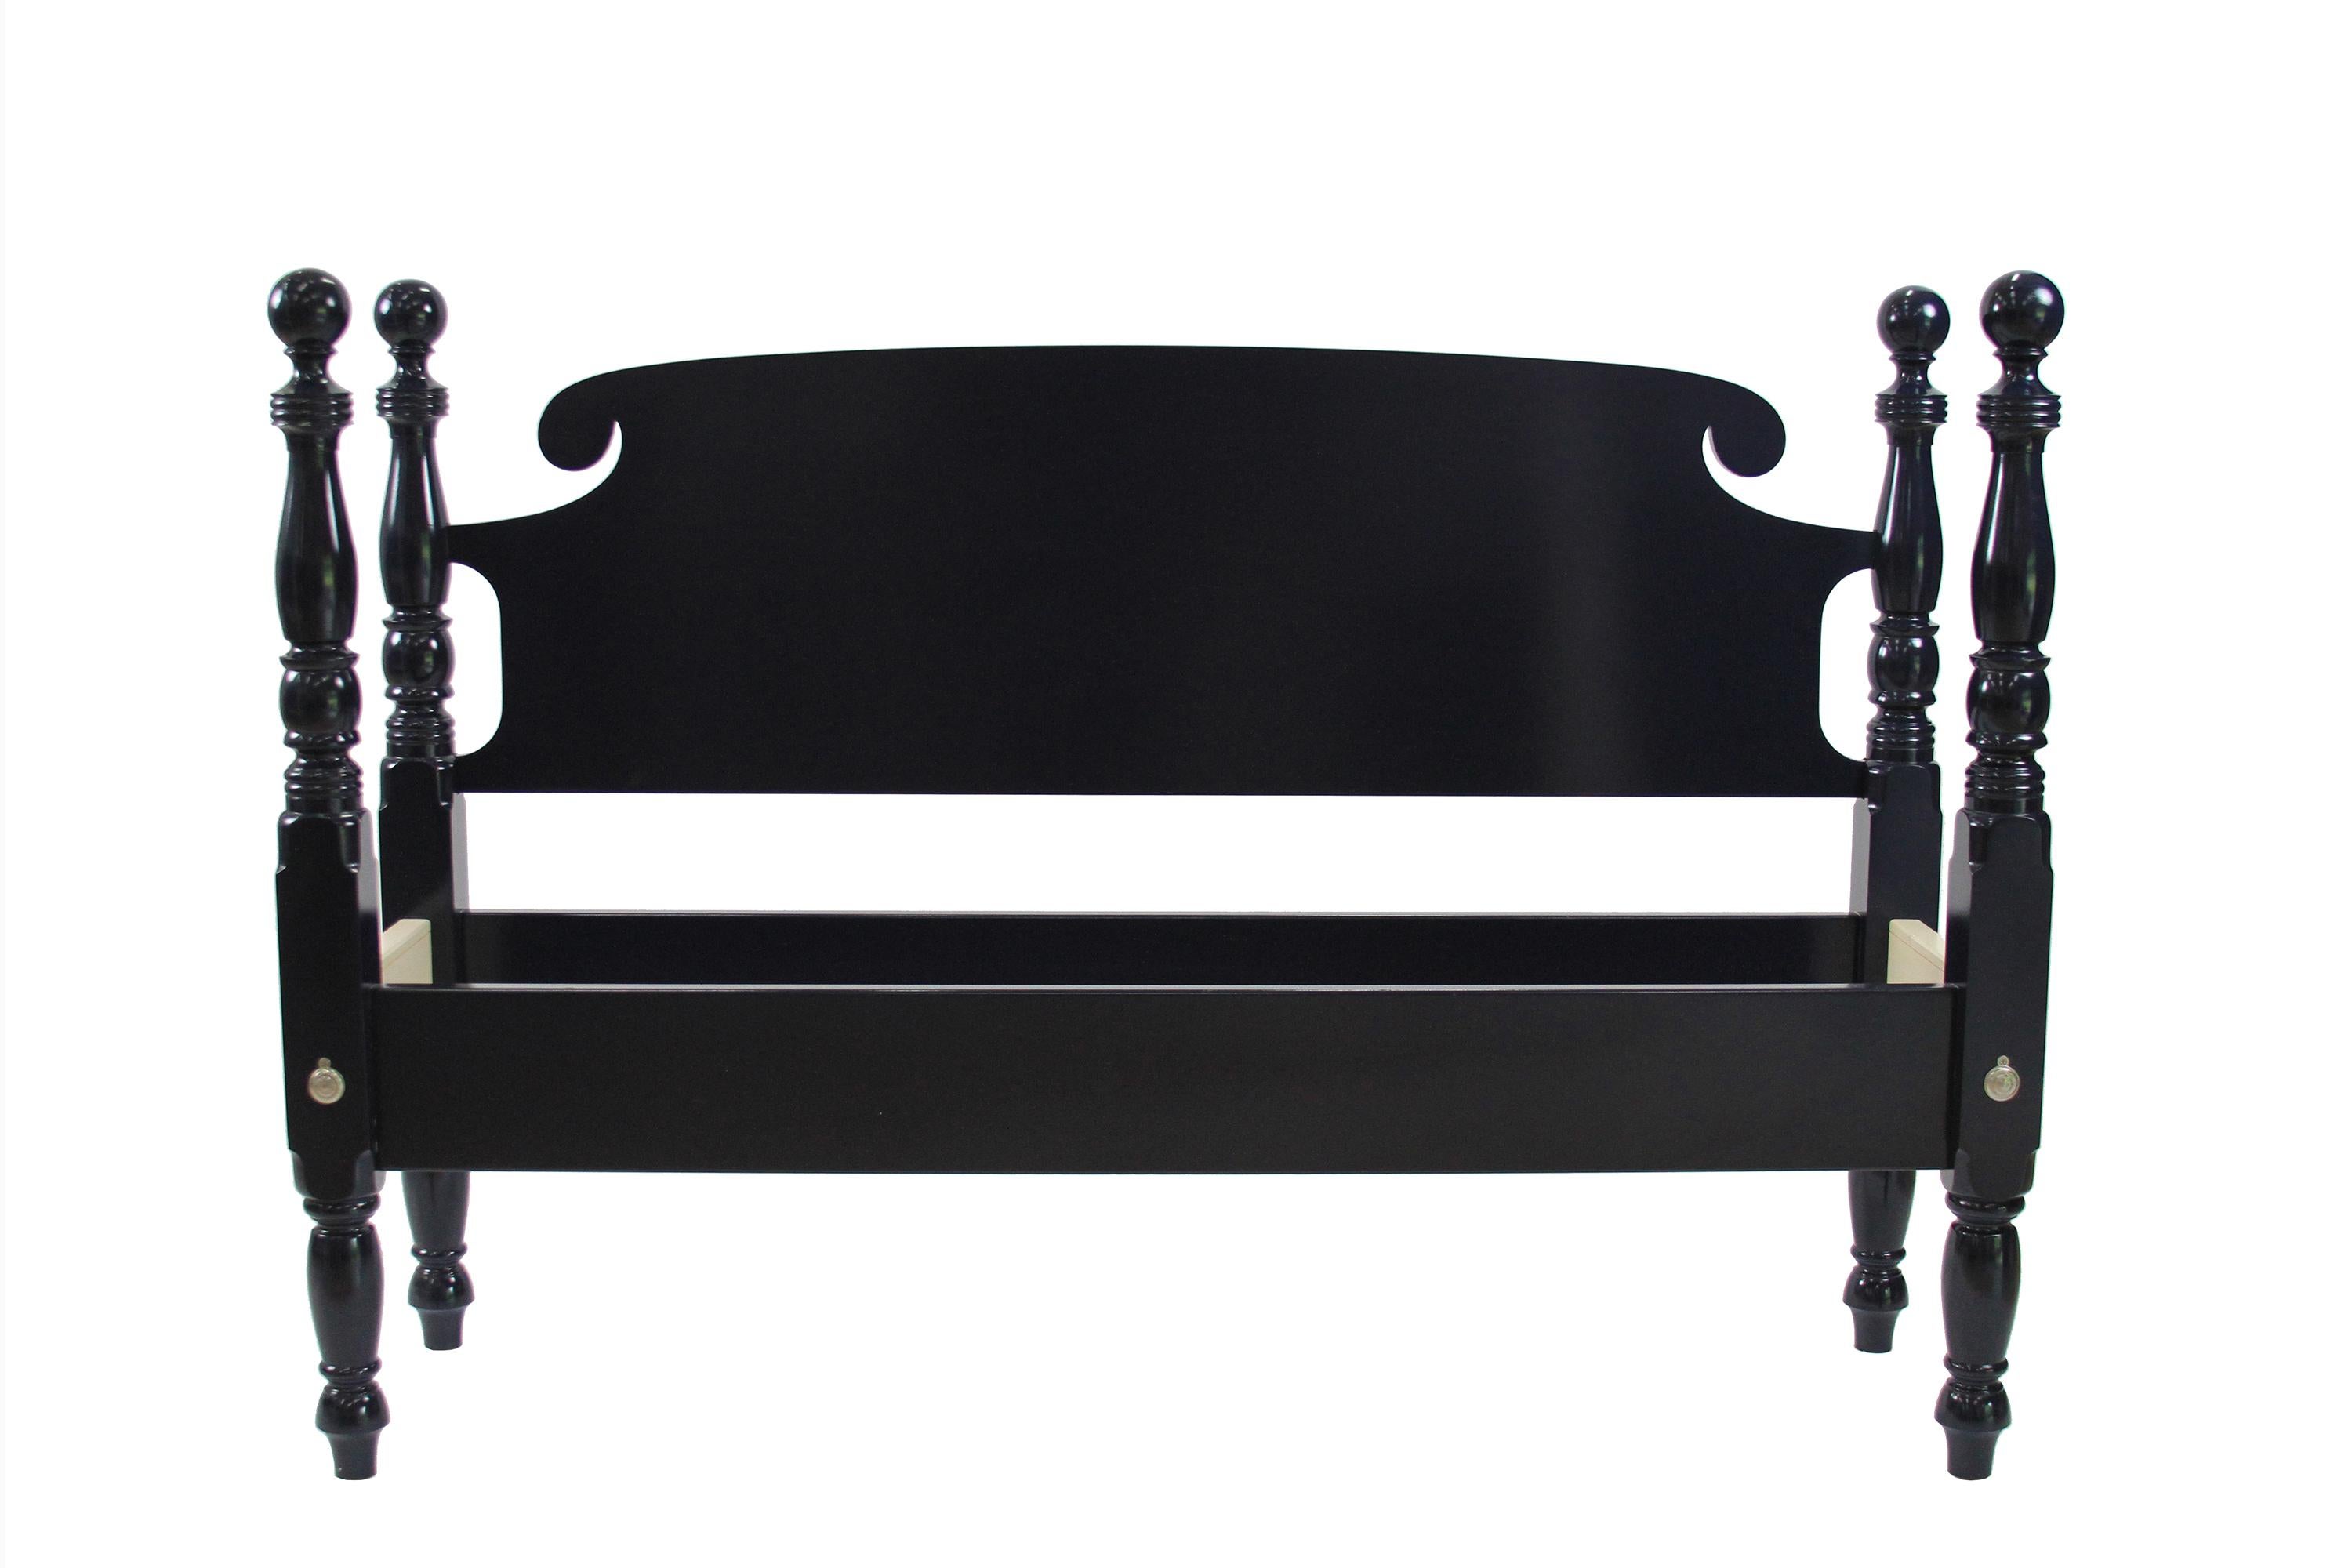 The Classic cannonball bed features the favorite round ball top bed posts with a merry cut-out flat headboard. This timeless Classic is perfect for guest rooms and children's rooms. Shown as a Queen it is available in all standard sizes as well as